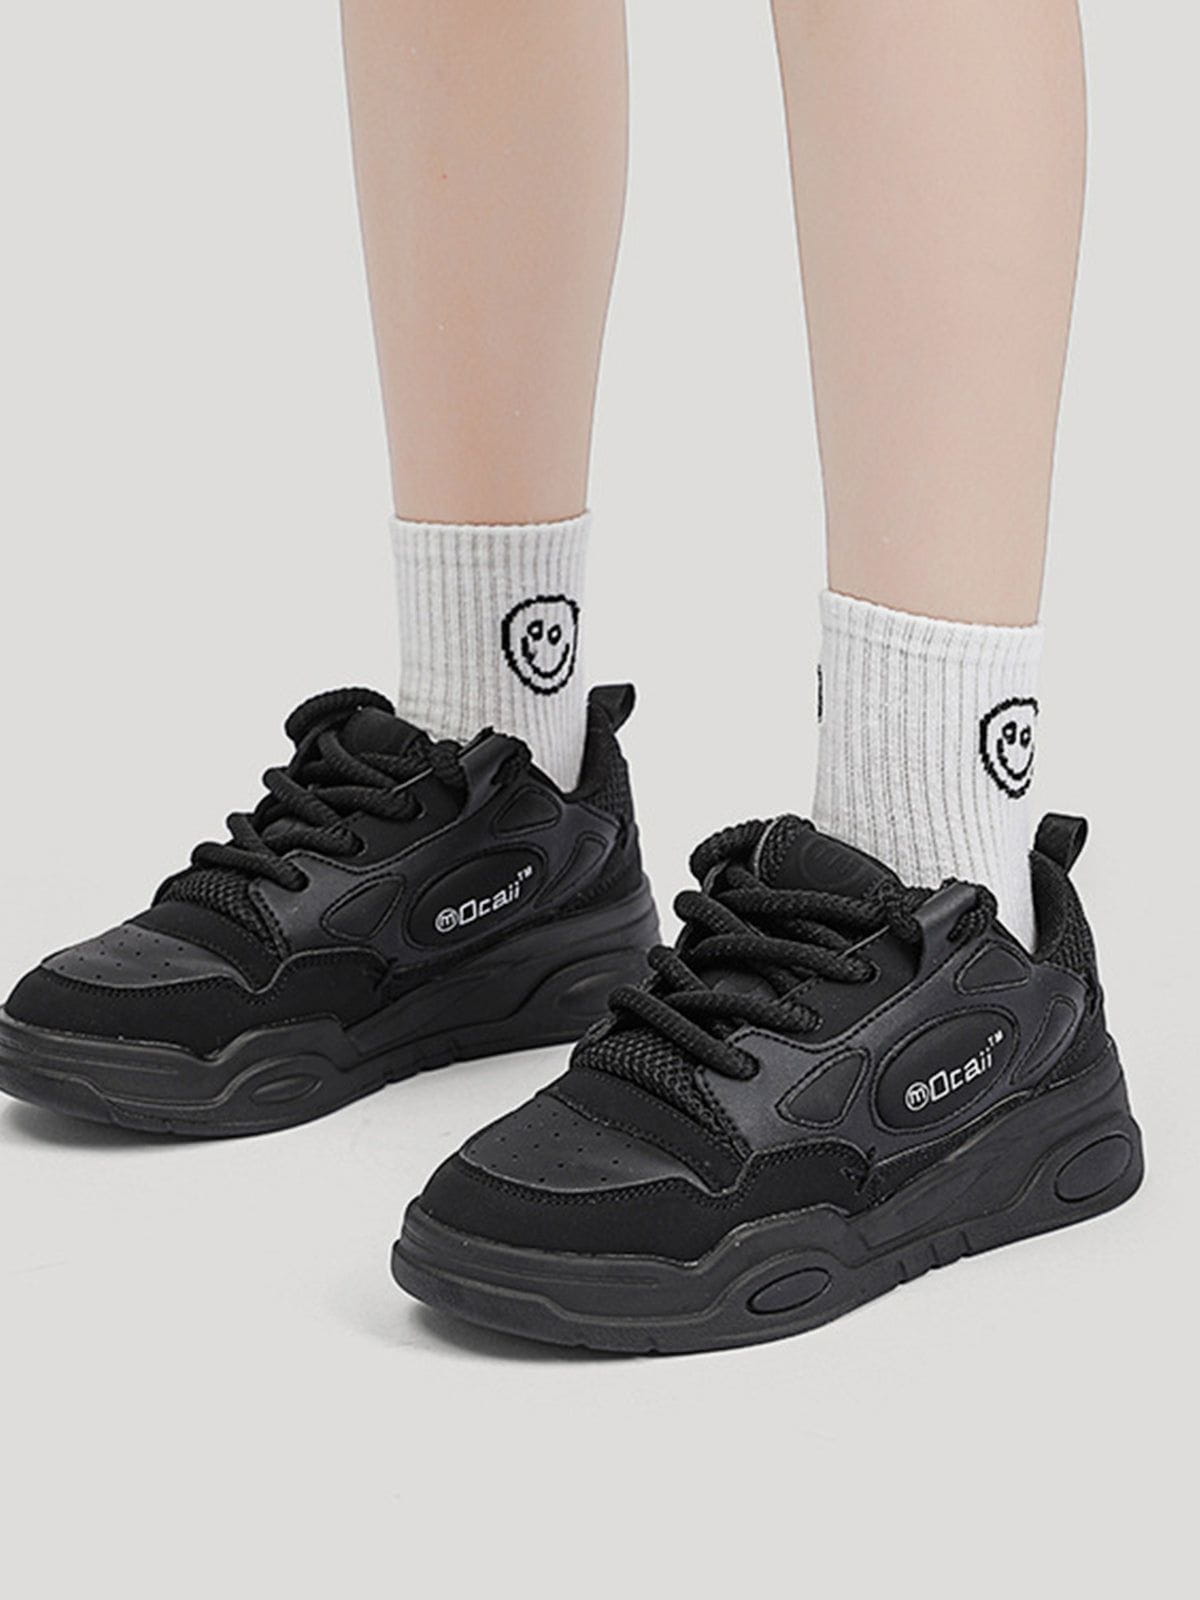 Couple Versatile Chunky Heightened Shoes Streetwear Brand Techwear Combat Tactical YUGEN THEORY